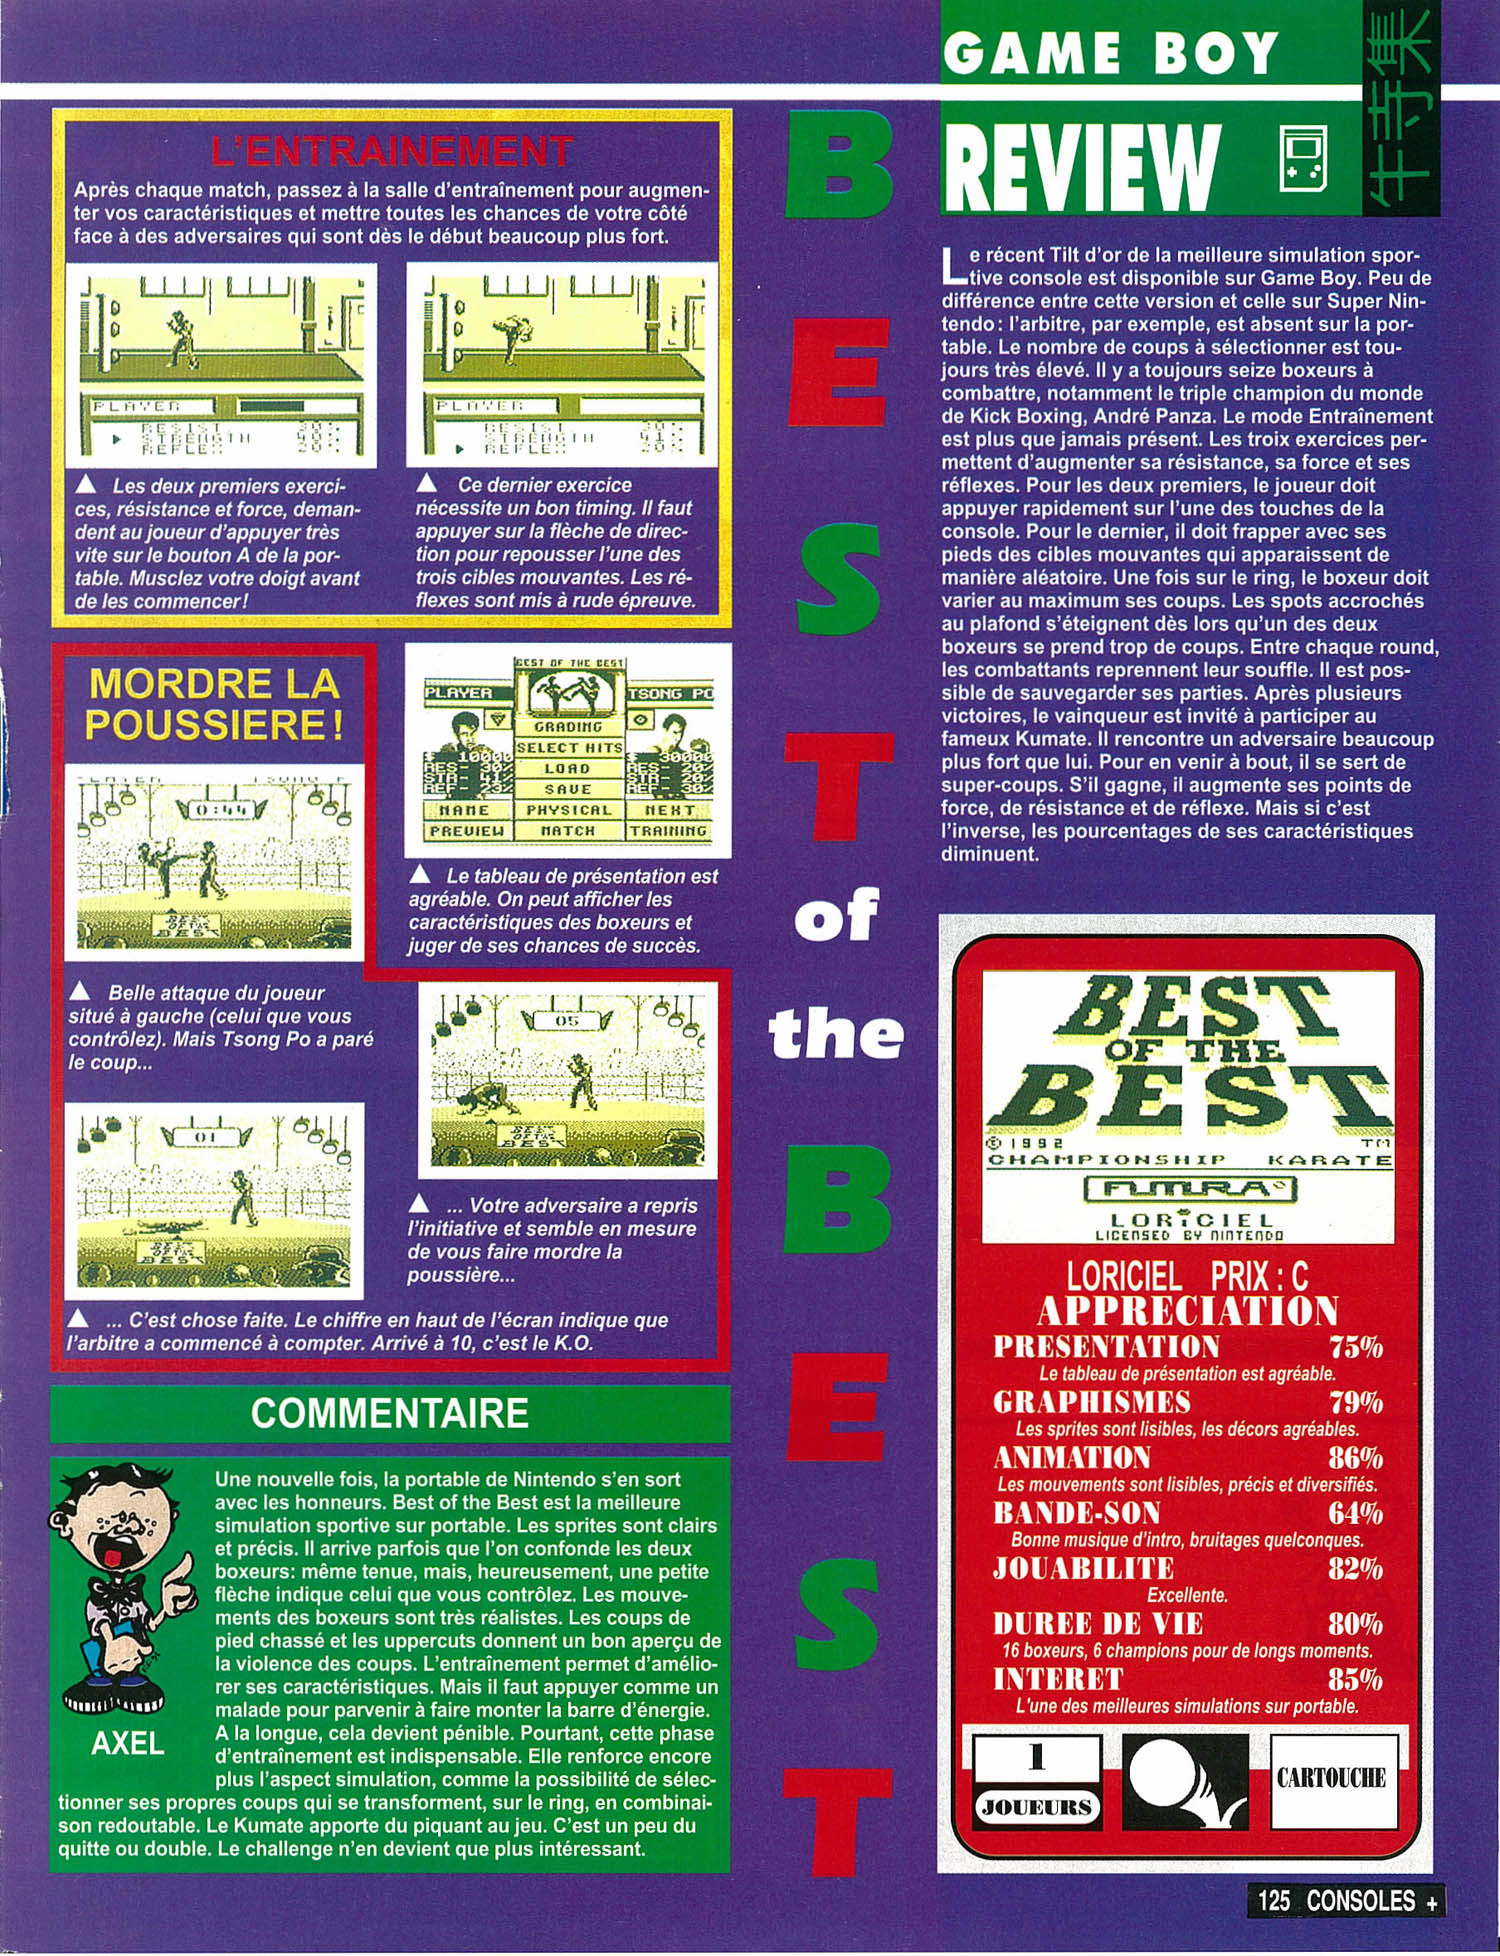 tests/1485/Consoles + 019 - Page 125 (avril 1993).jpg